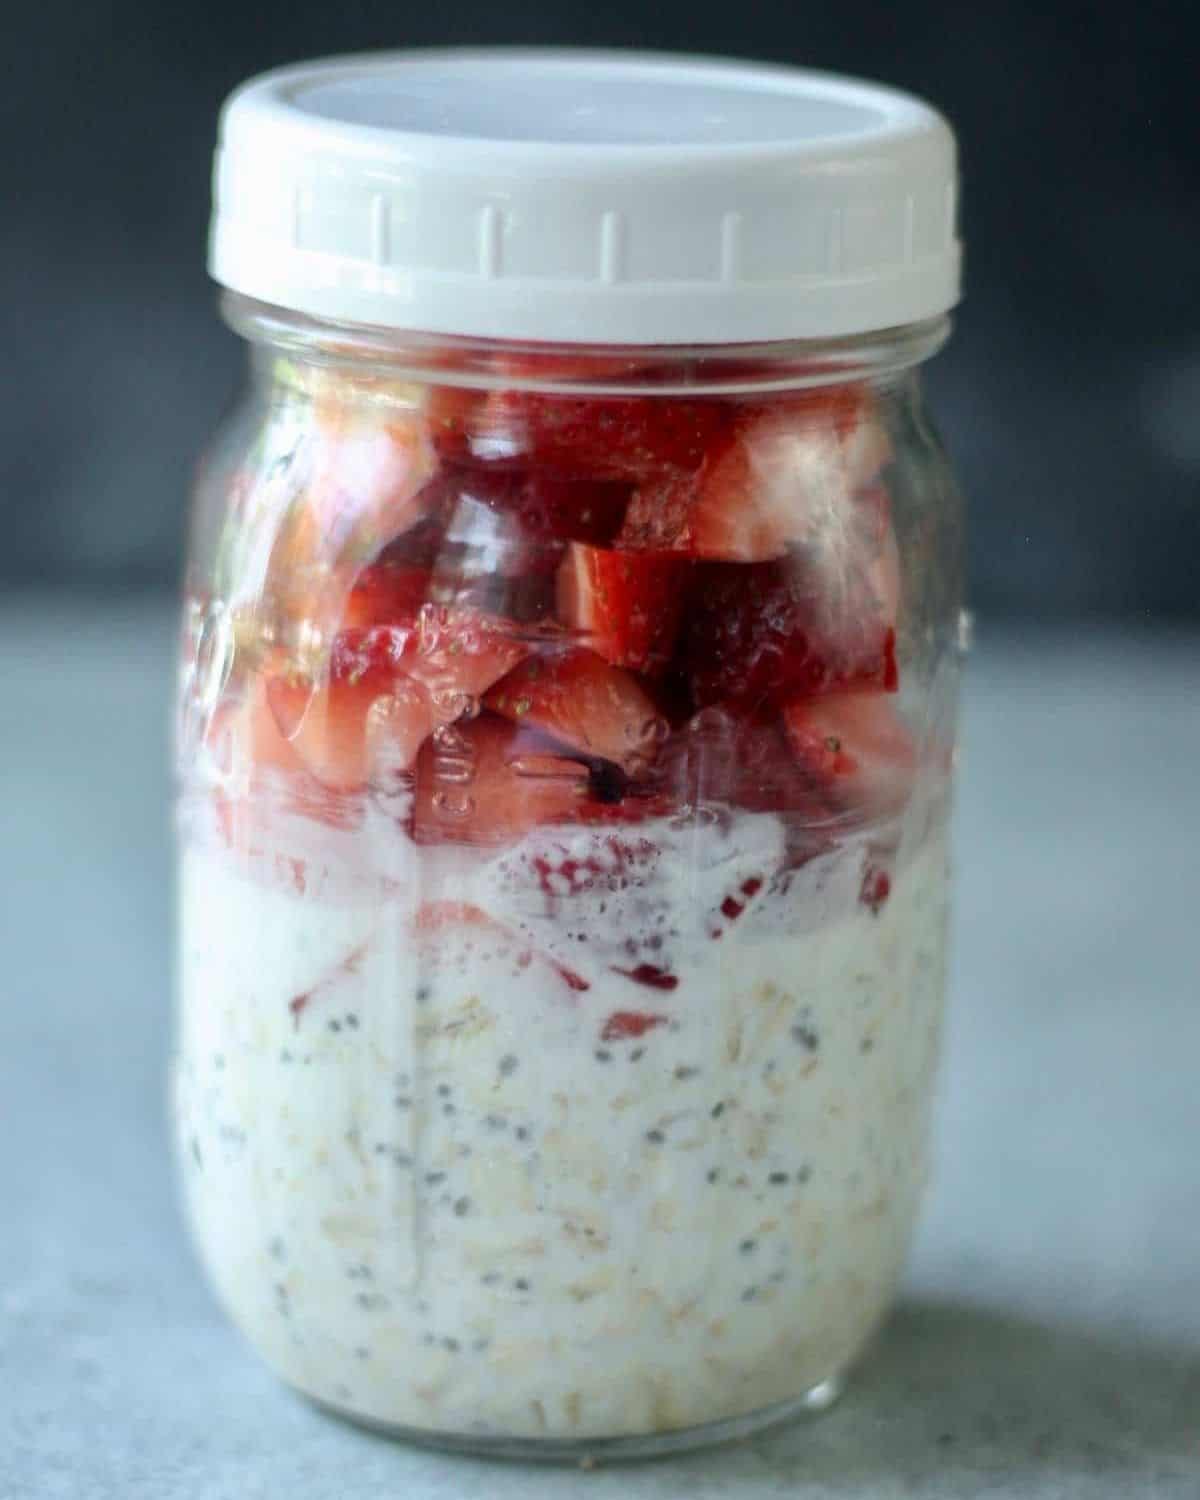 16oz Mason Jars for Overnight Oats Oatmeal Container - 2 Pack with